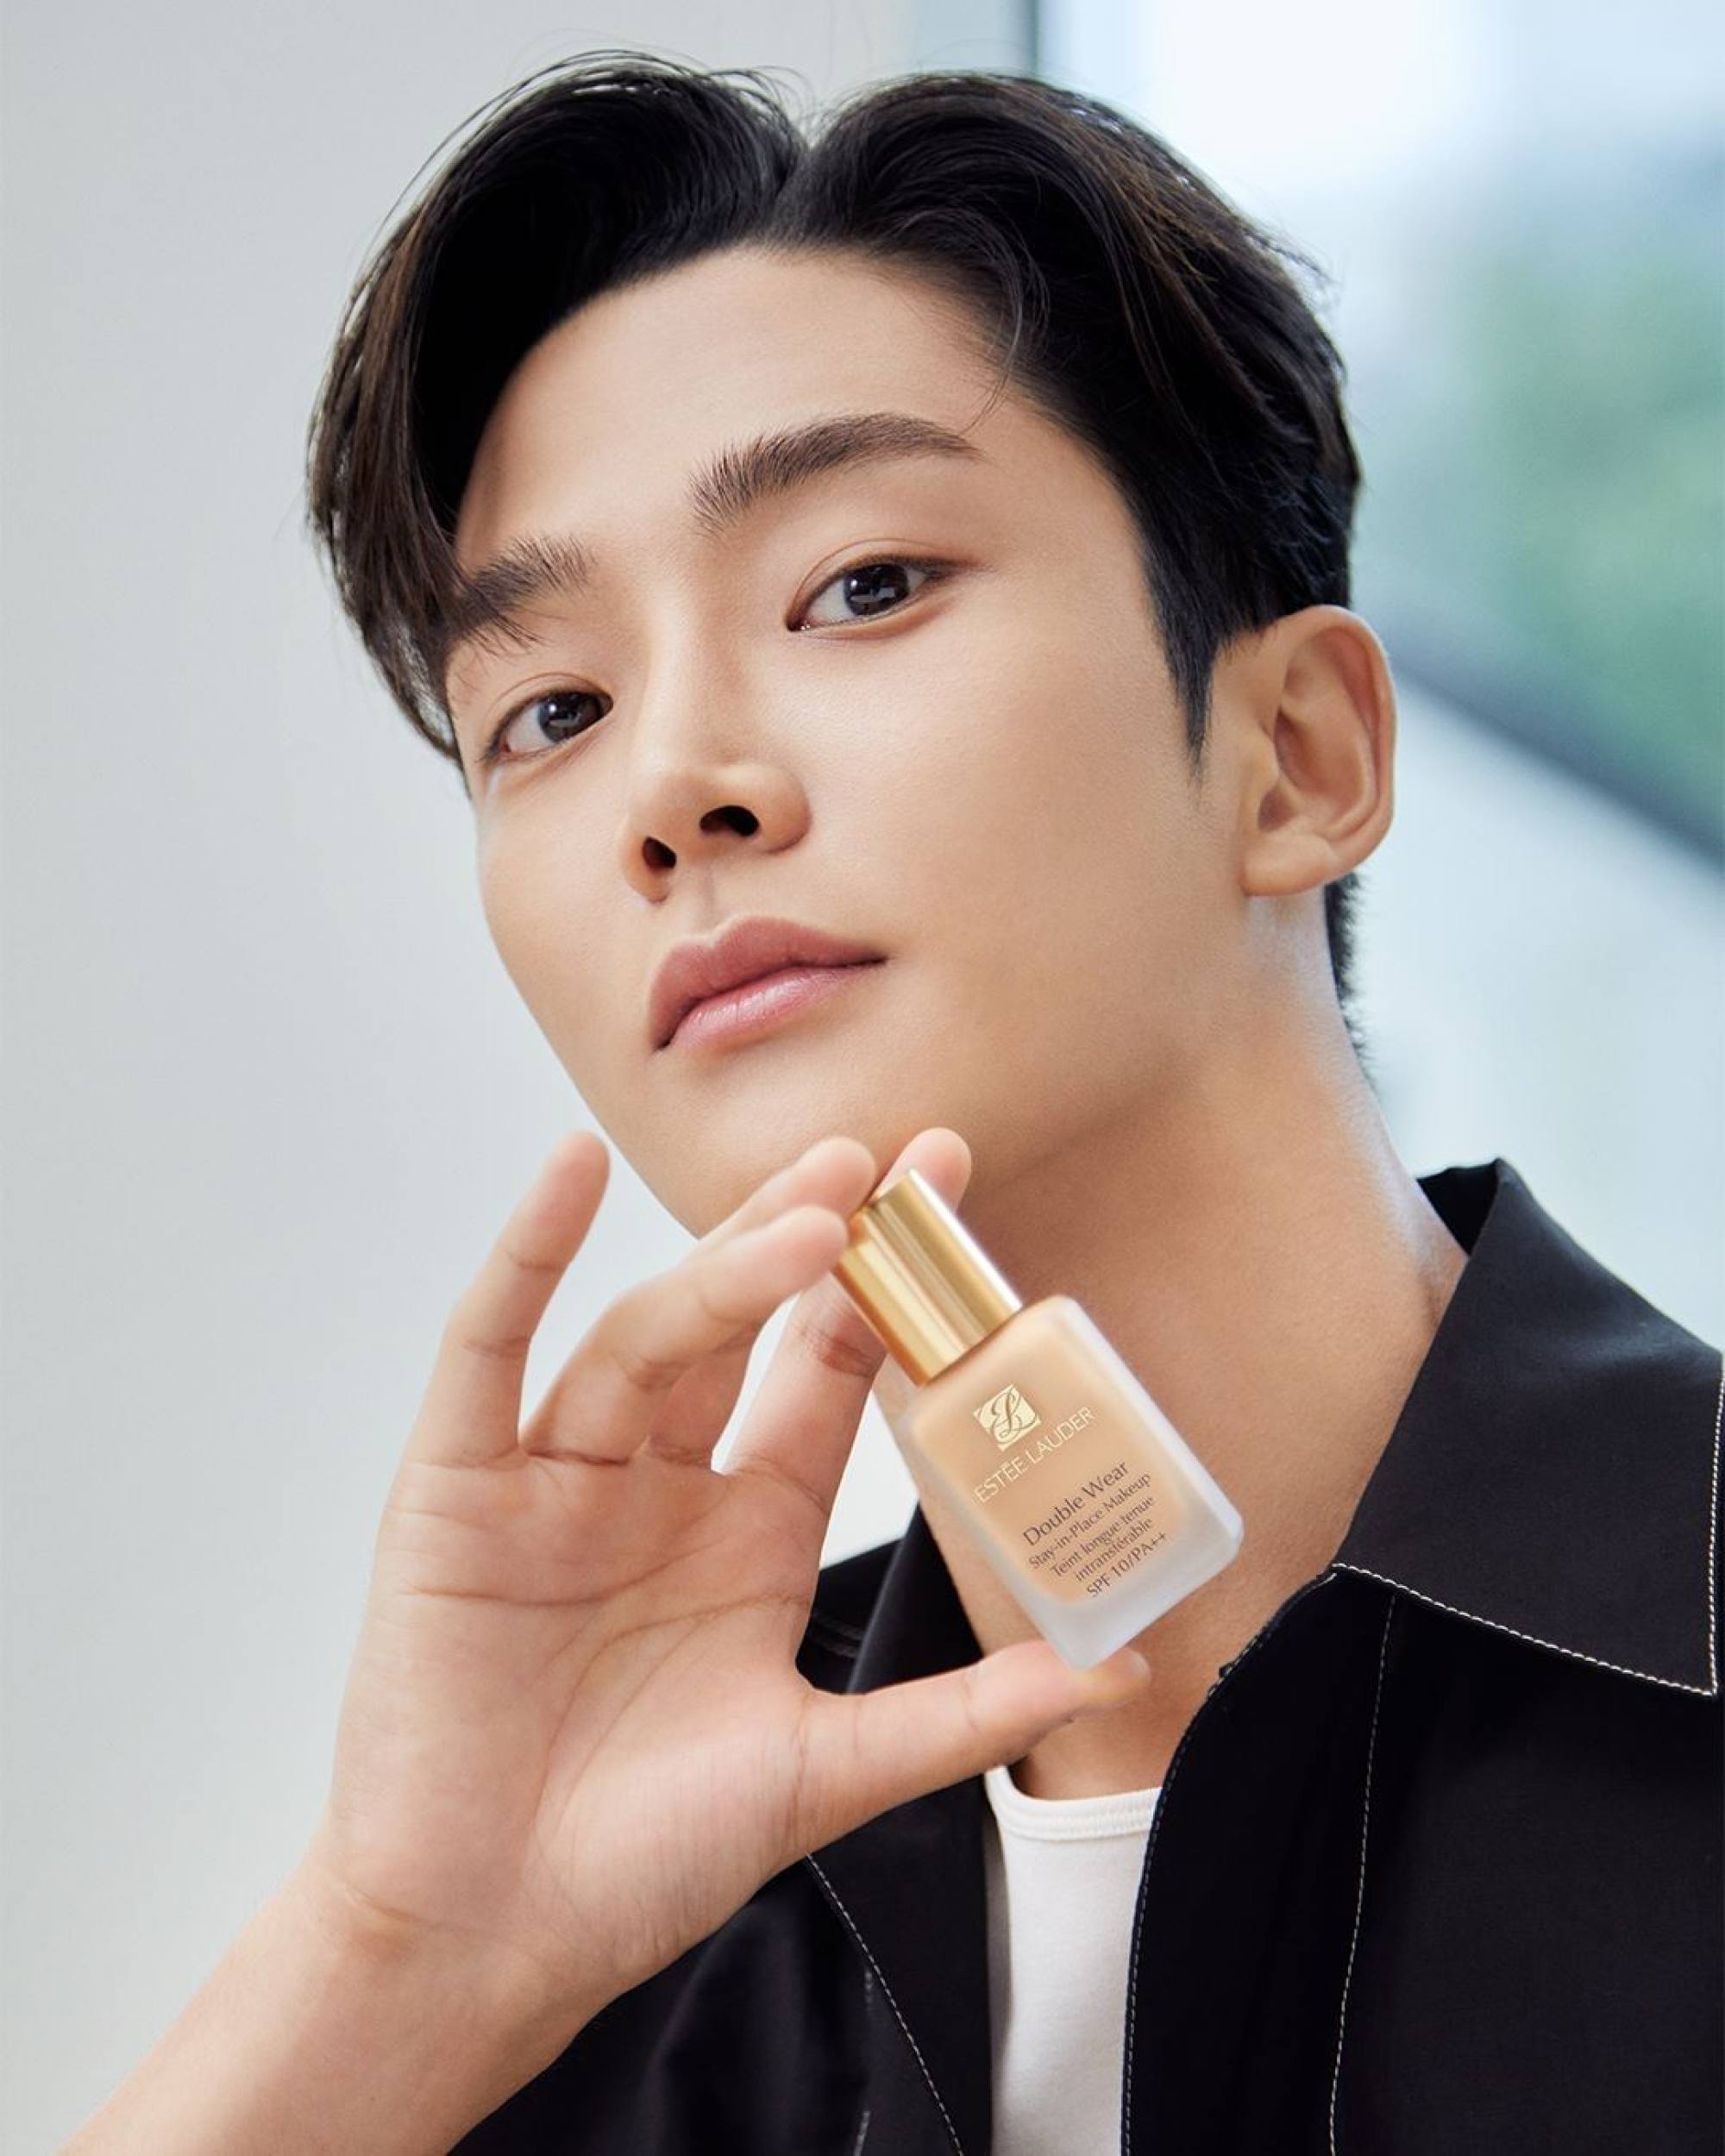 8 male Korean stars ruling the beauty world: from Astro's Cha Eun